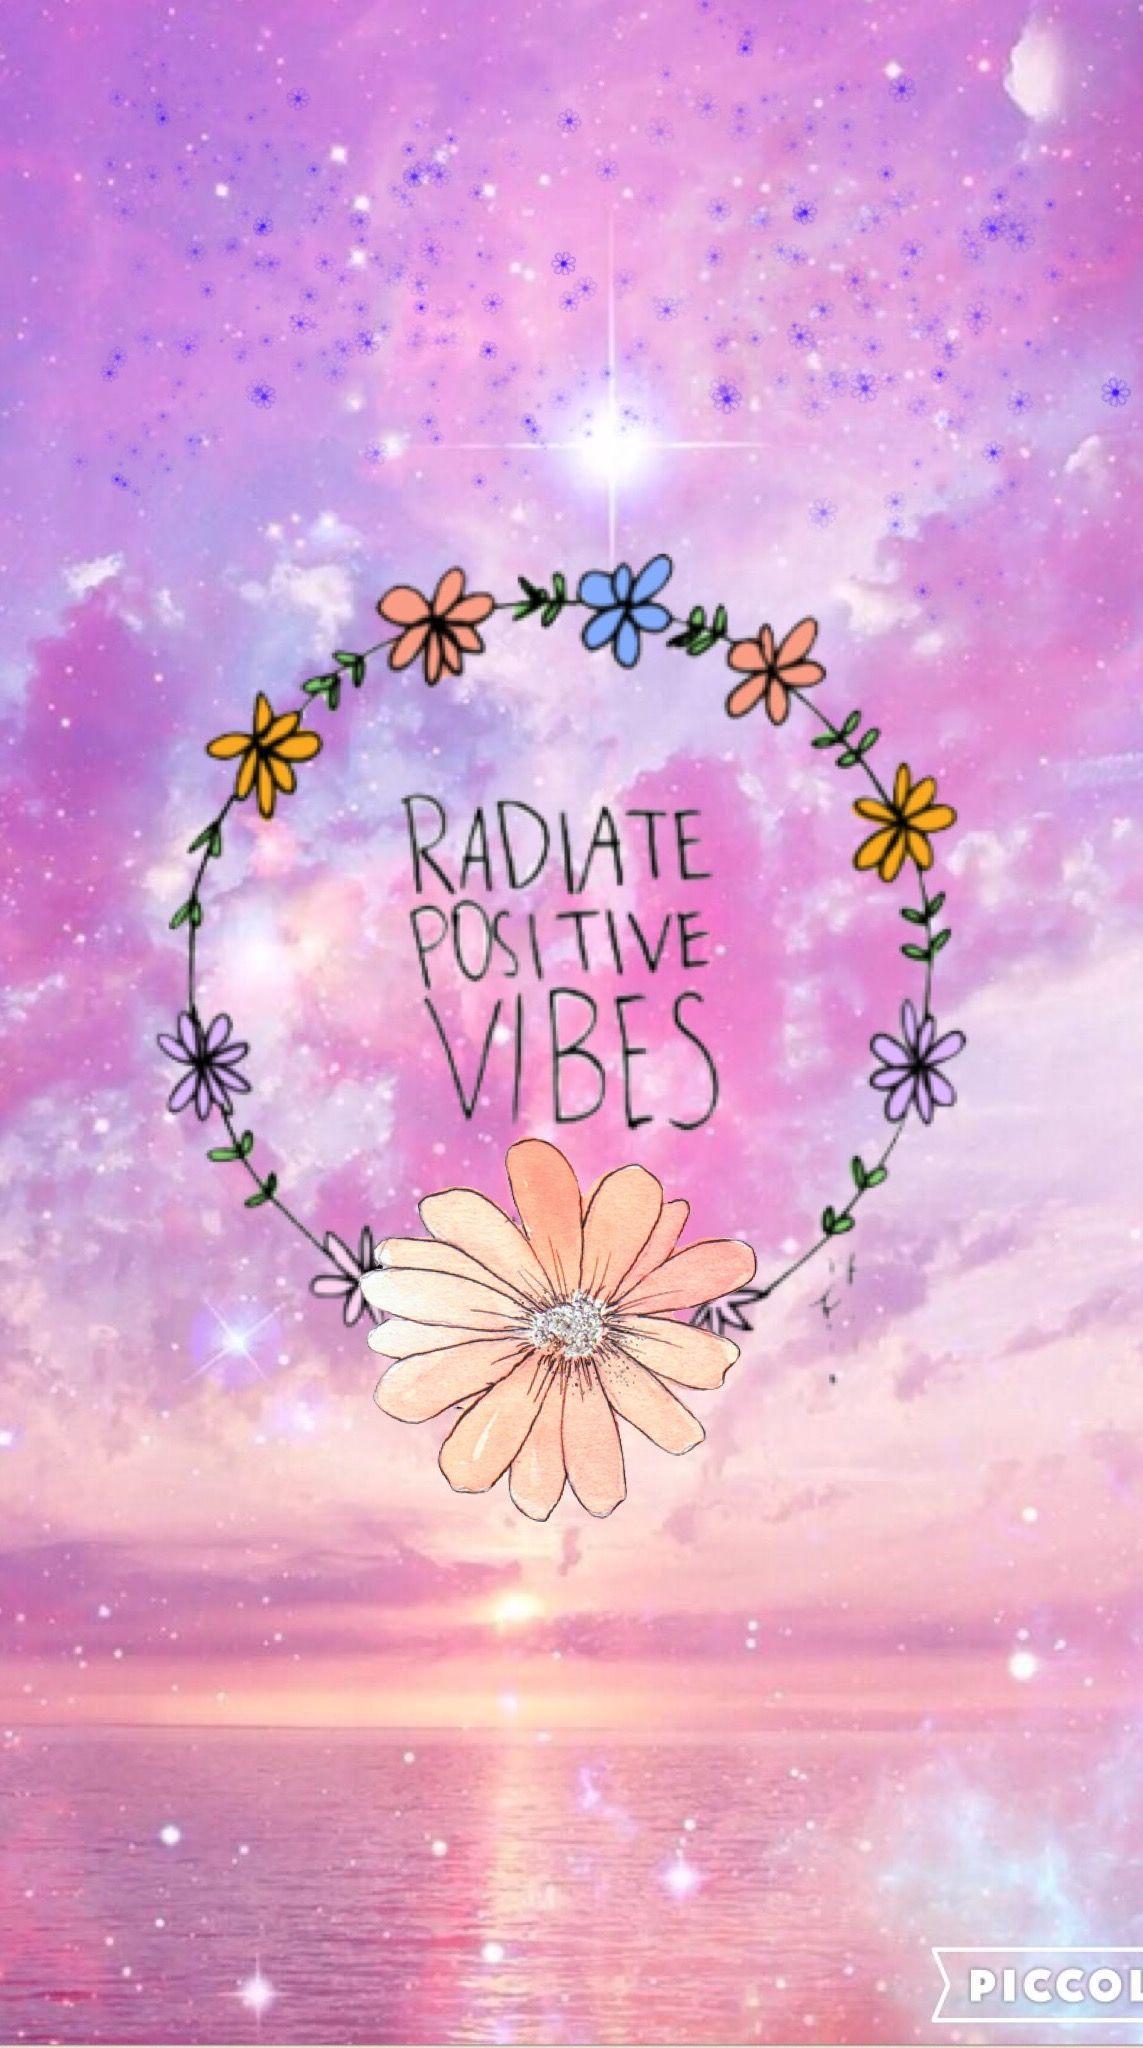 Good vibes pink. iPhone Wallpaper.Create